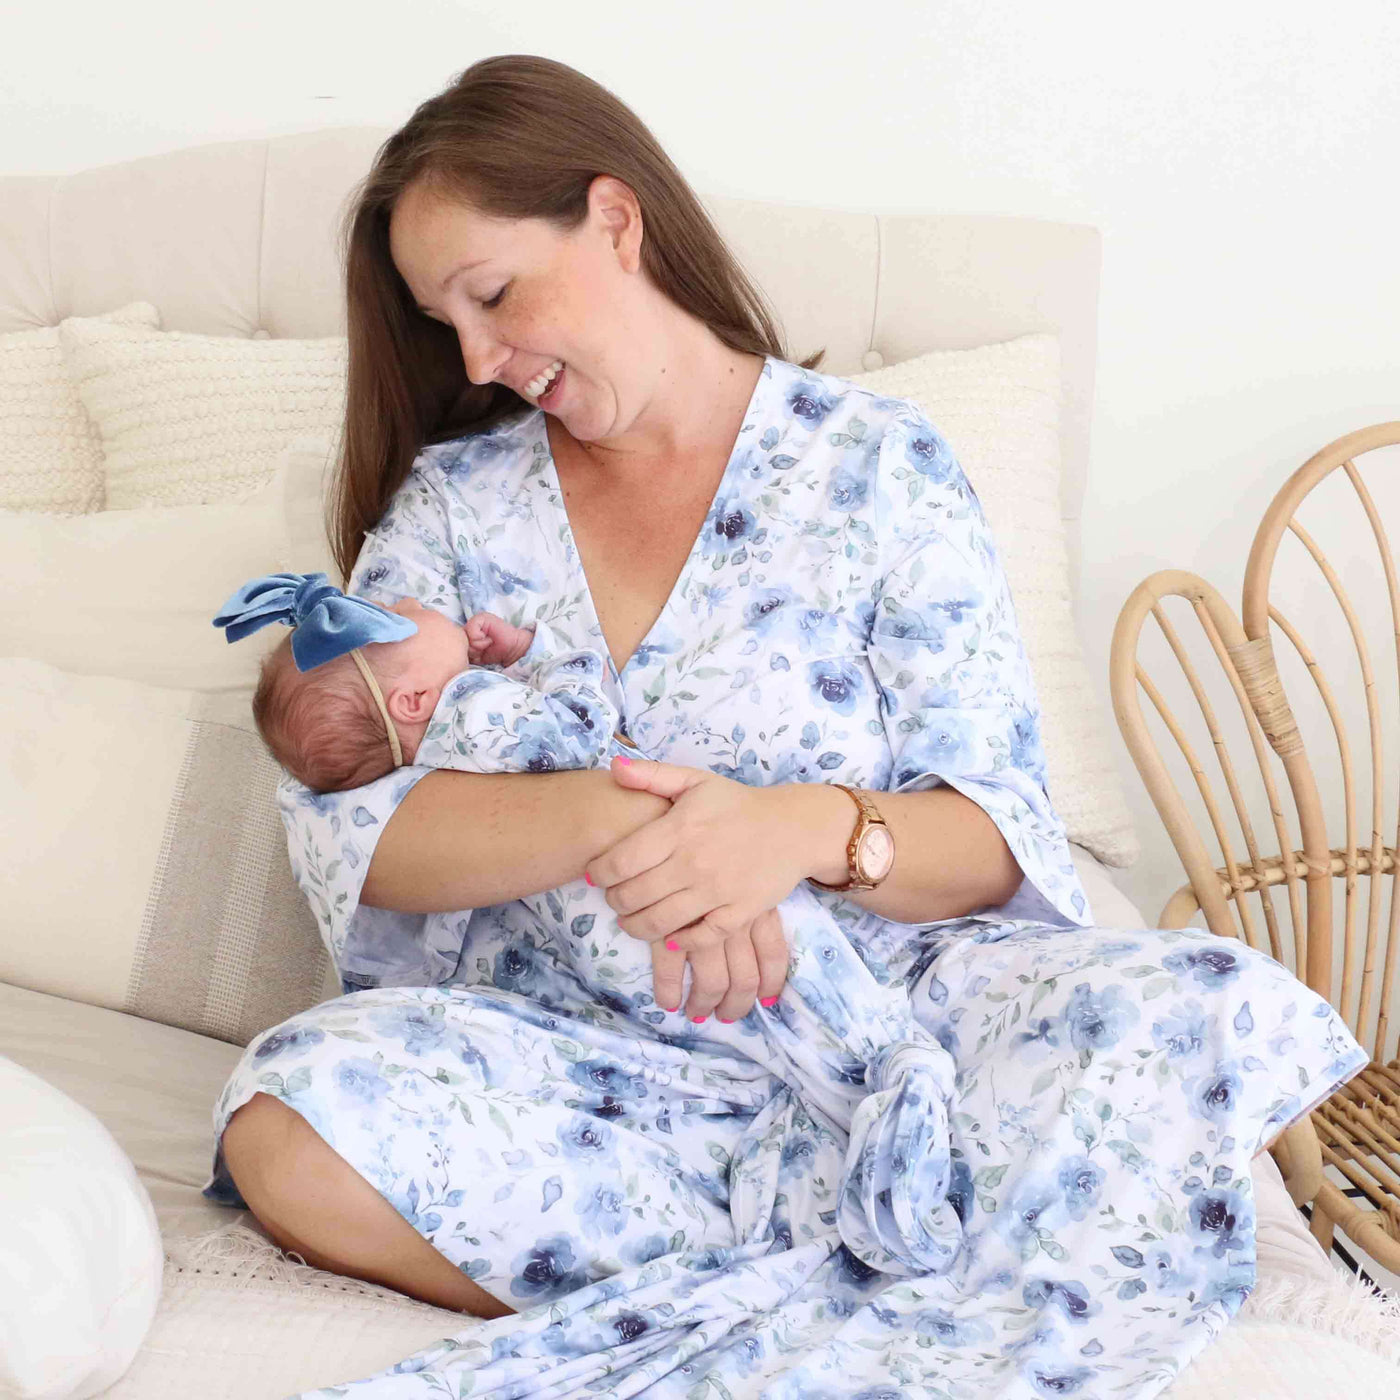 3 in 1 Maternity Labor Delivery Nursing Hospital Birthing Gown & Matching  Robe, Delivery Robe, Maternity Robe, Maternity Gown, Hospital Gown